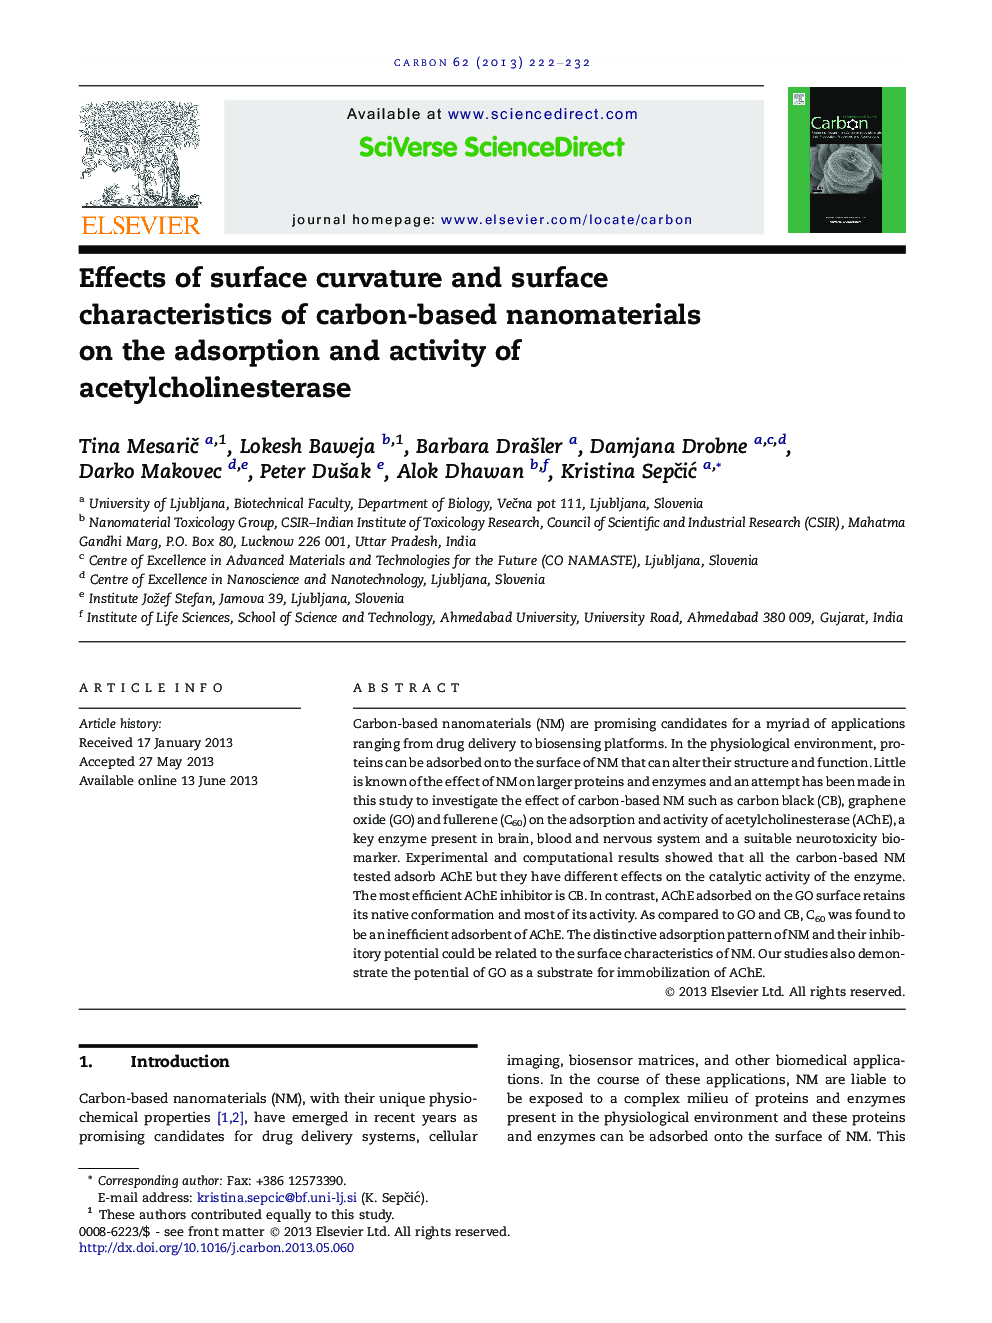 Effects of surface curvature and surface characteristics of carbon-based nanomaterials on the adsorption and activity of acetylcholinesterase